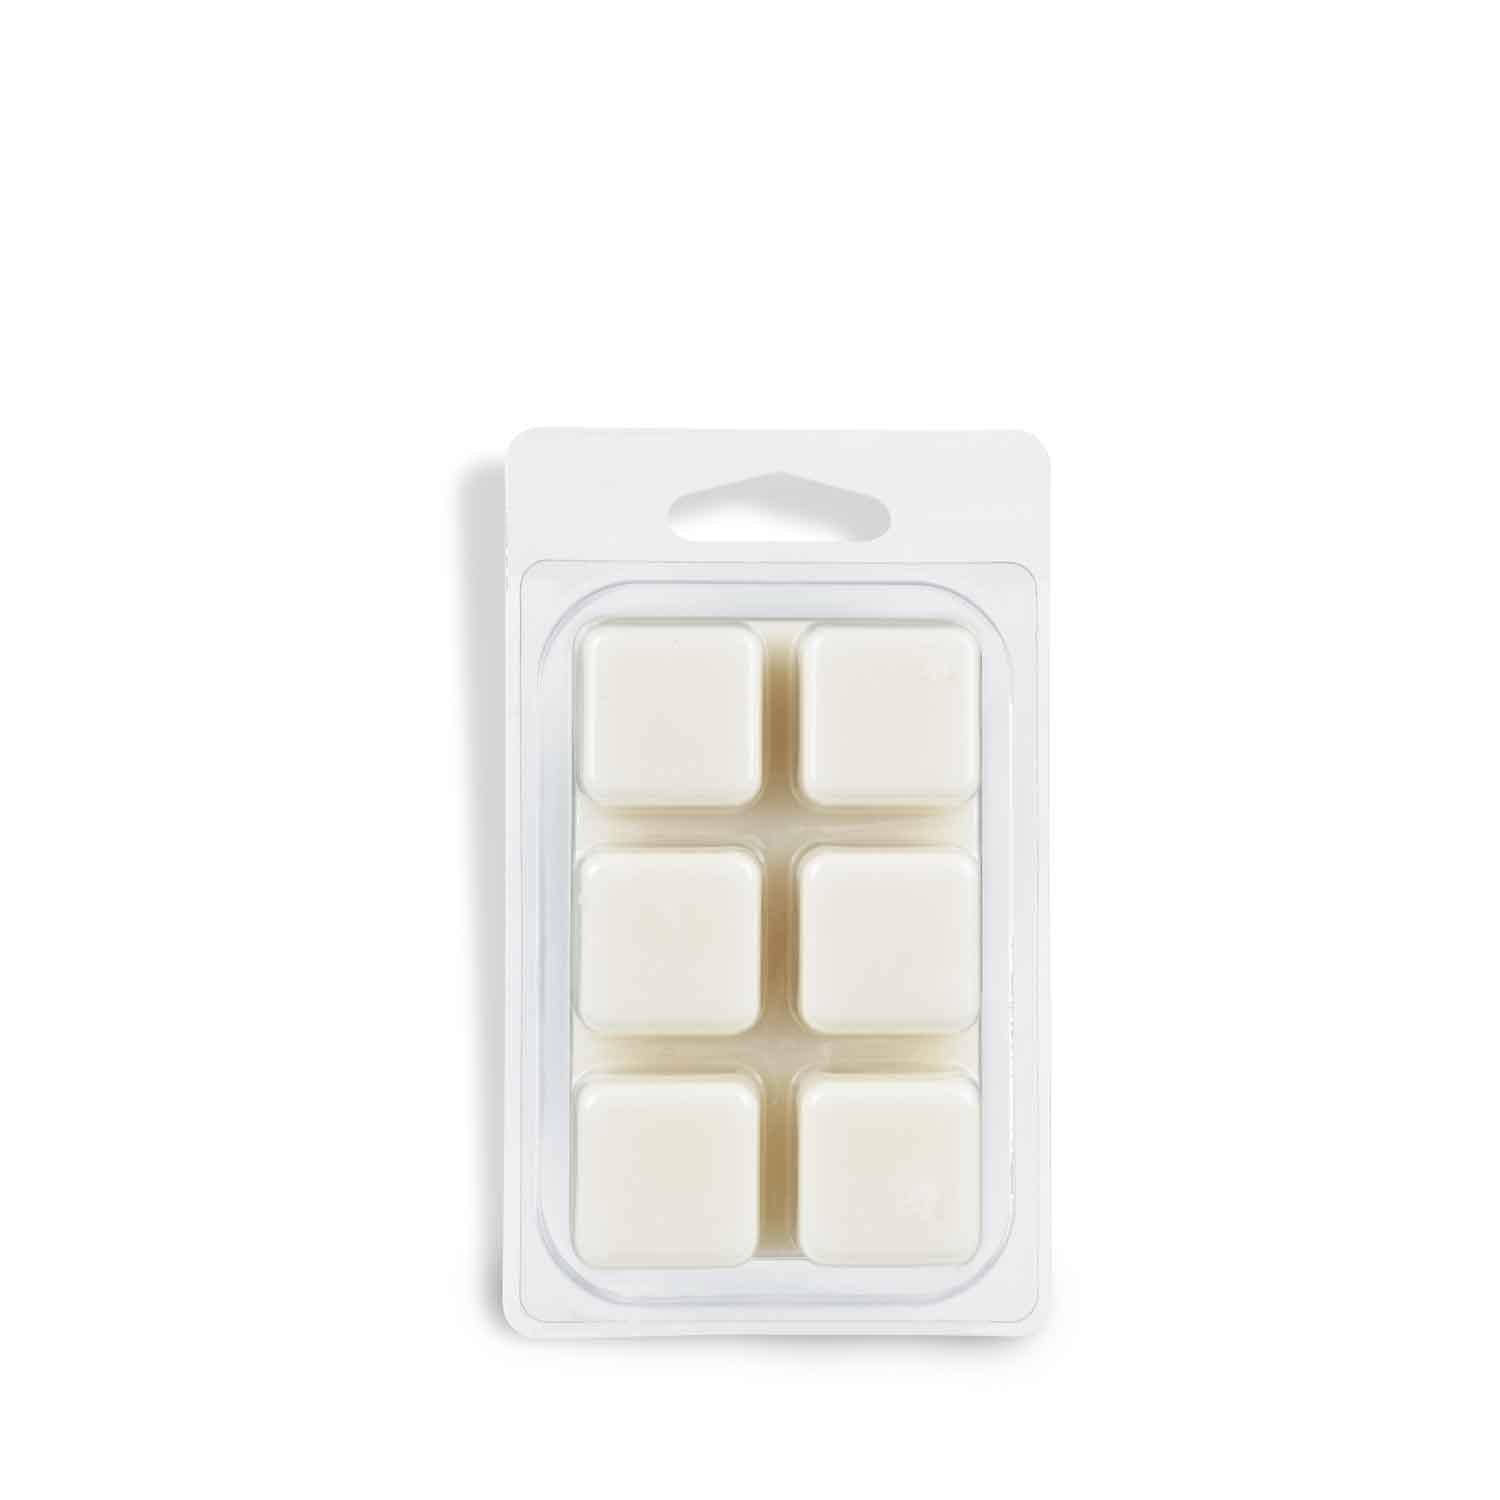 A pack of Sunwashed Cotton Scented Wax Melt (2.5 oz) tart bars on a white background by Tuscany Candle®.